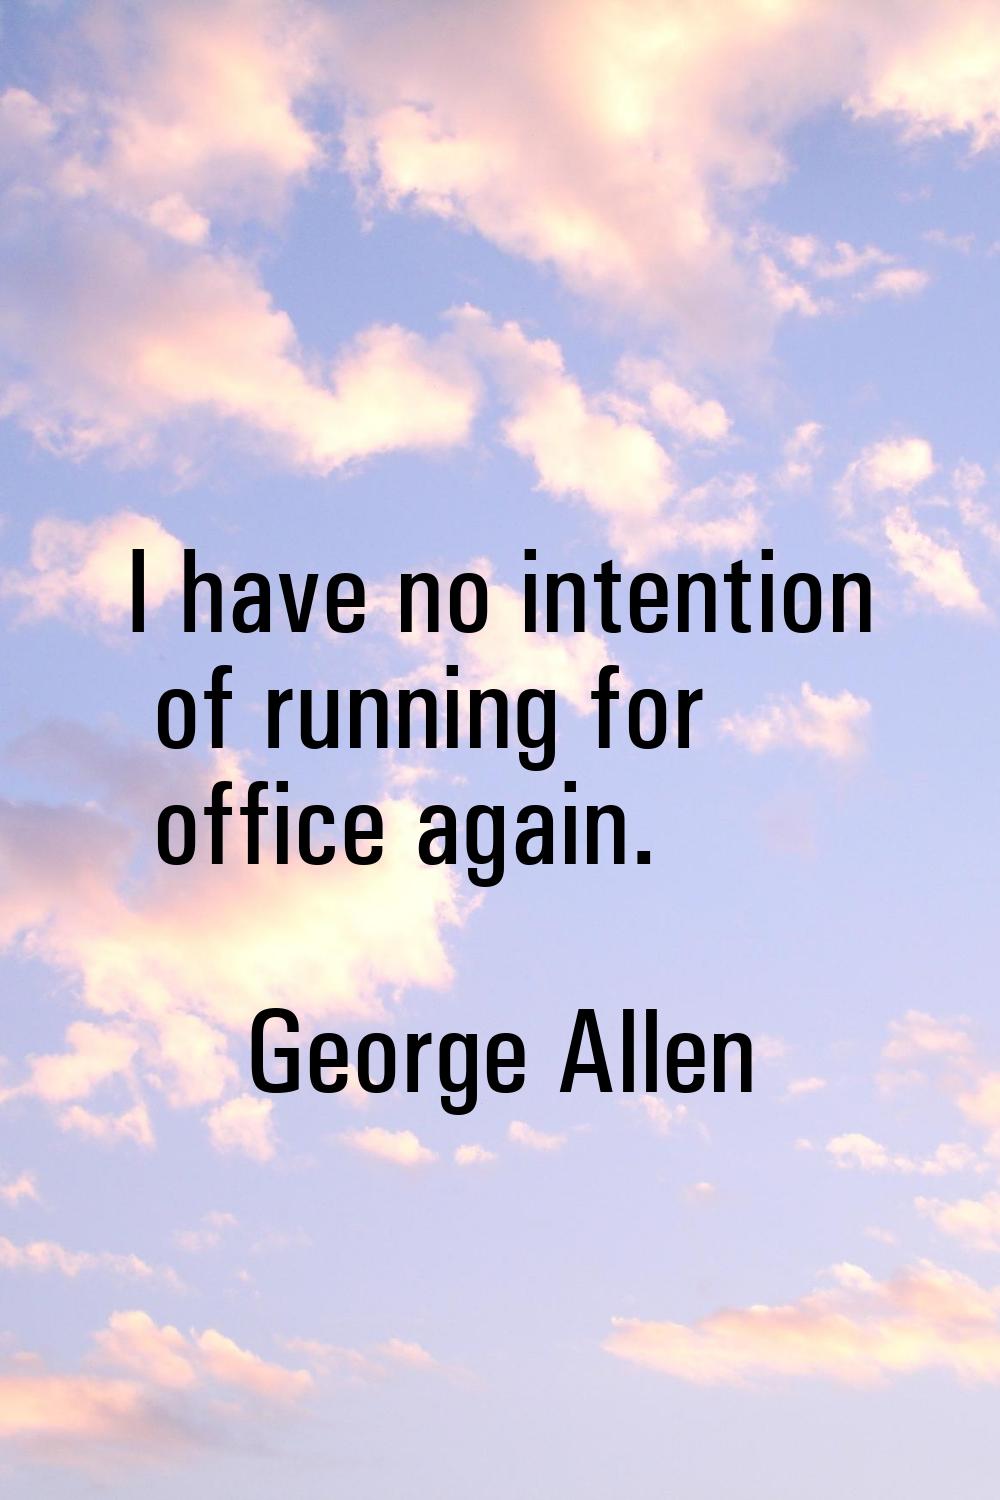 I have no intention of running for office again.